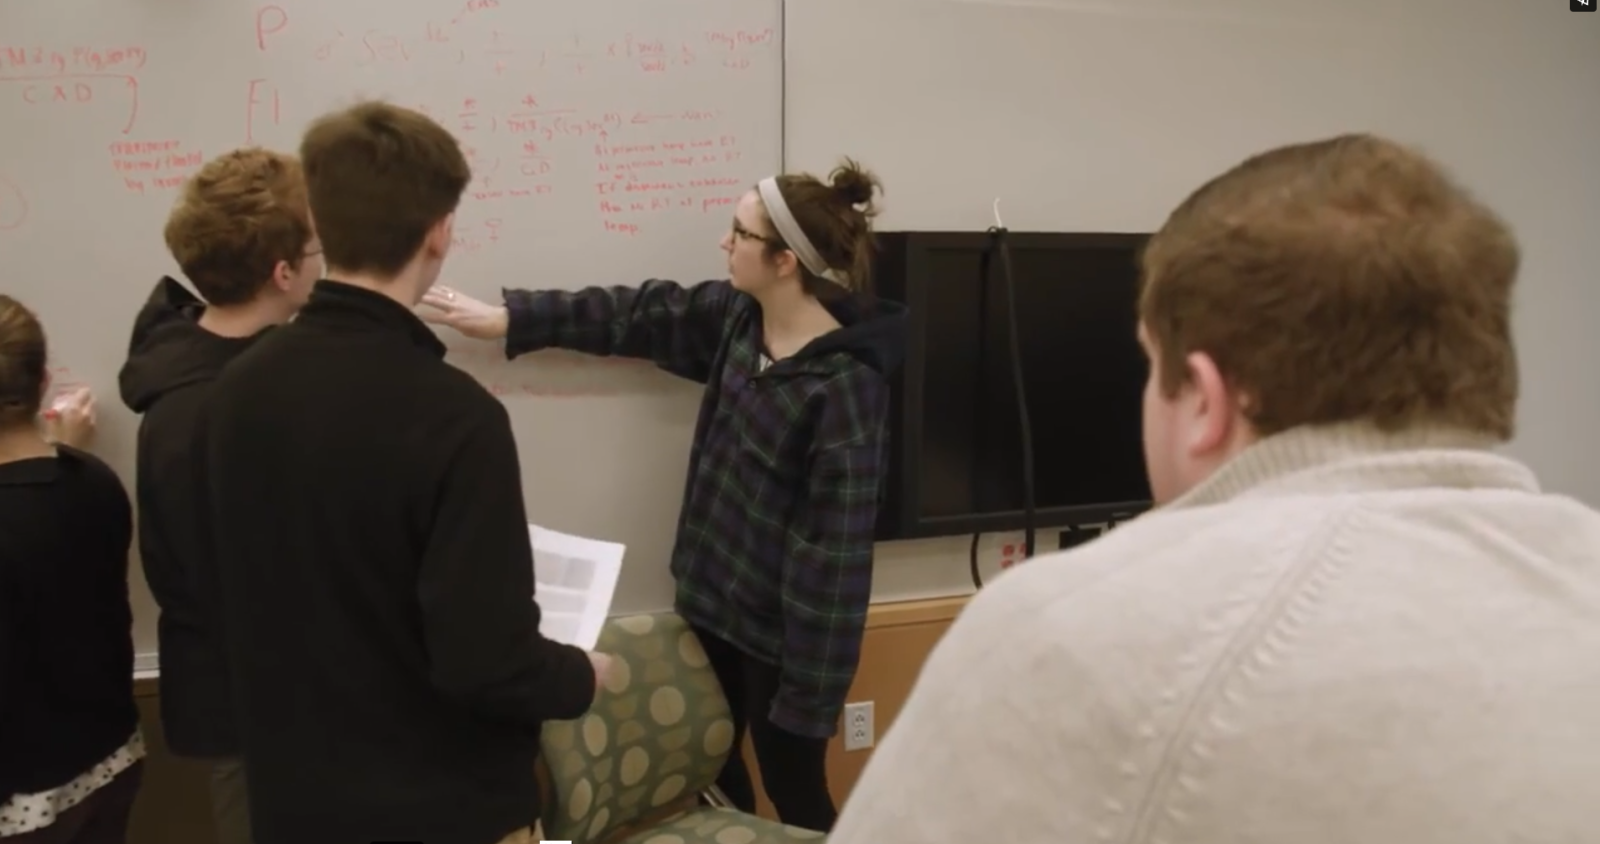 one student speaking to a group of other students while pointing to a white board